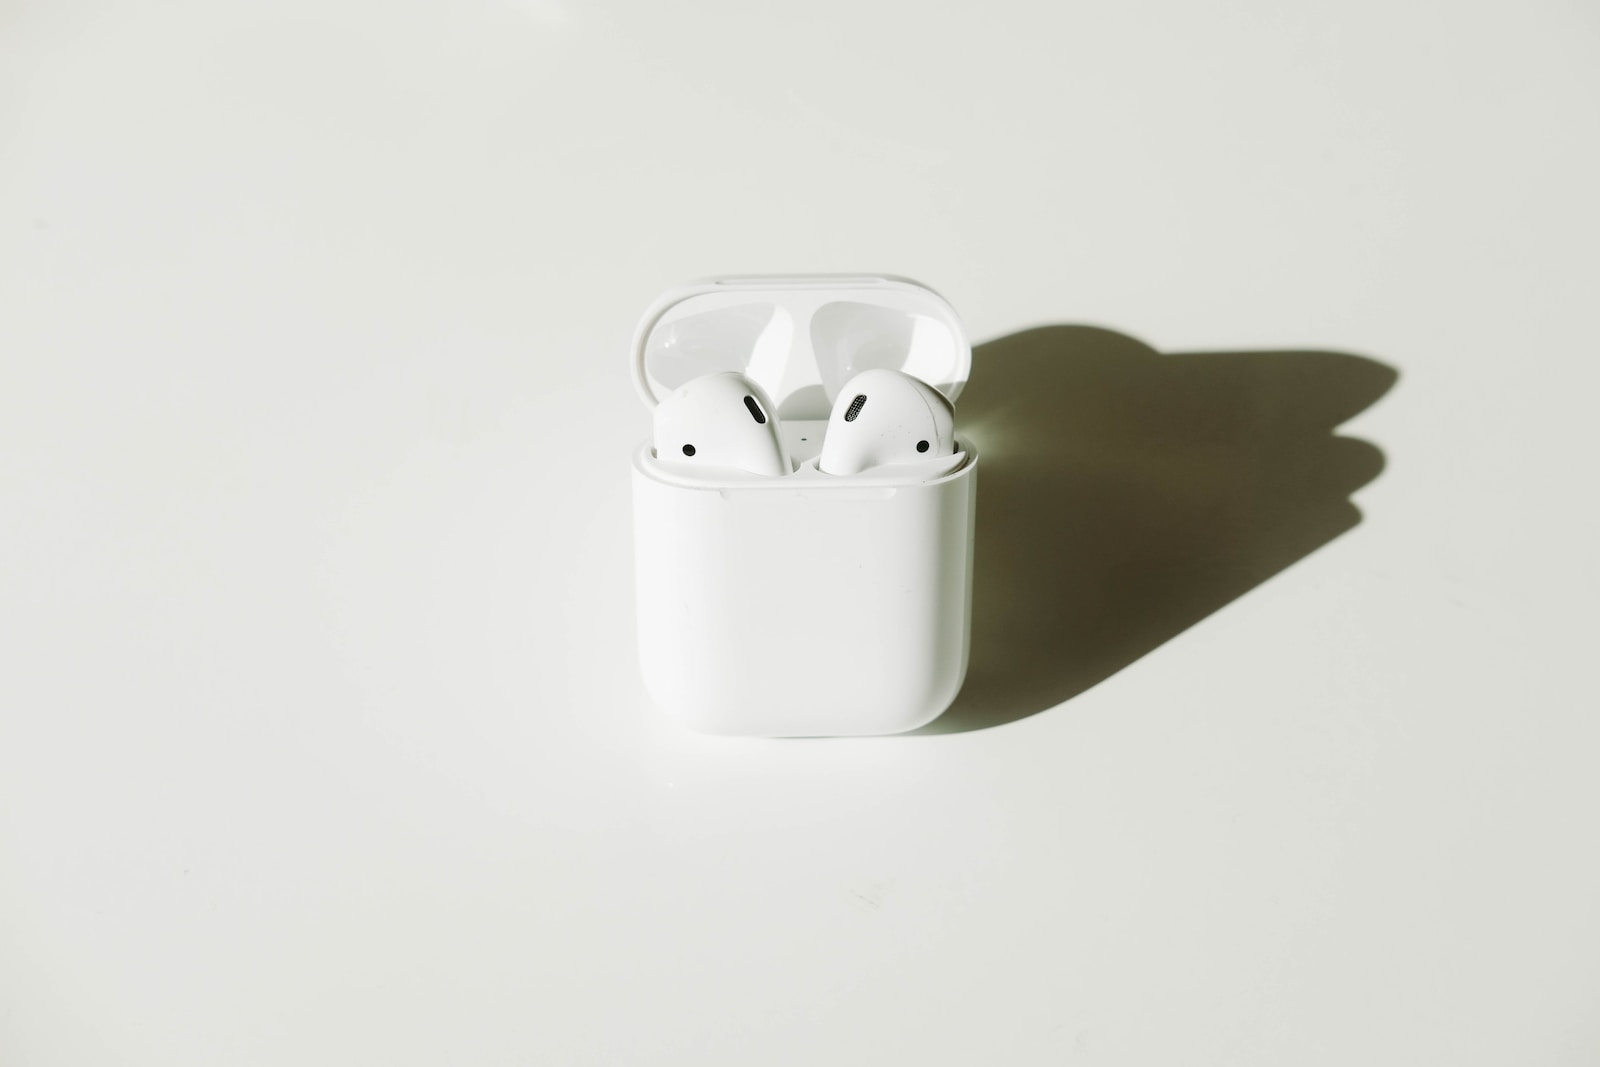 Can You Call The Police For Stolen AirPods?